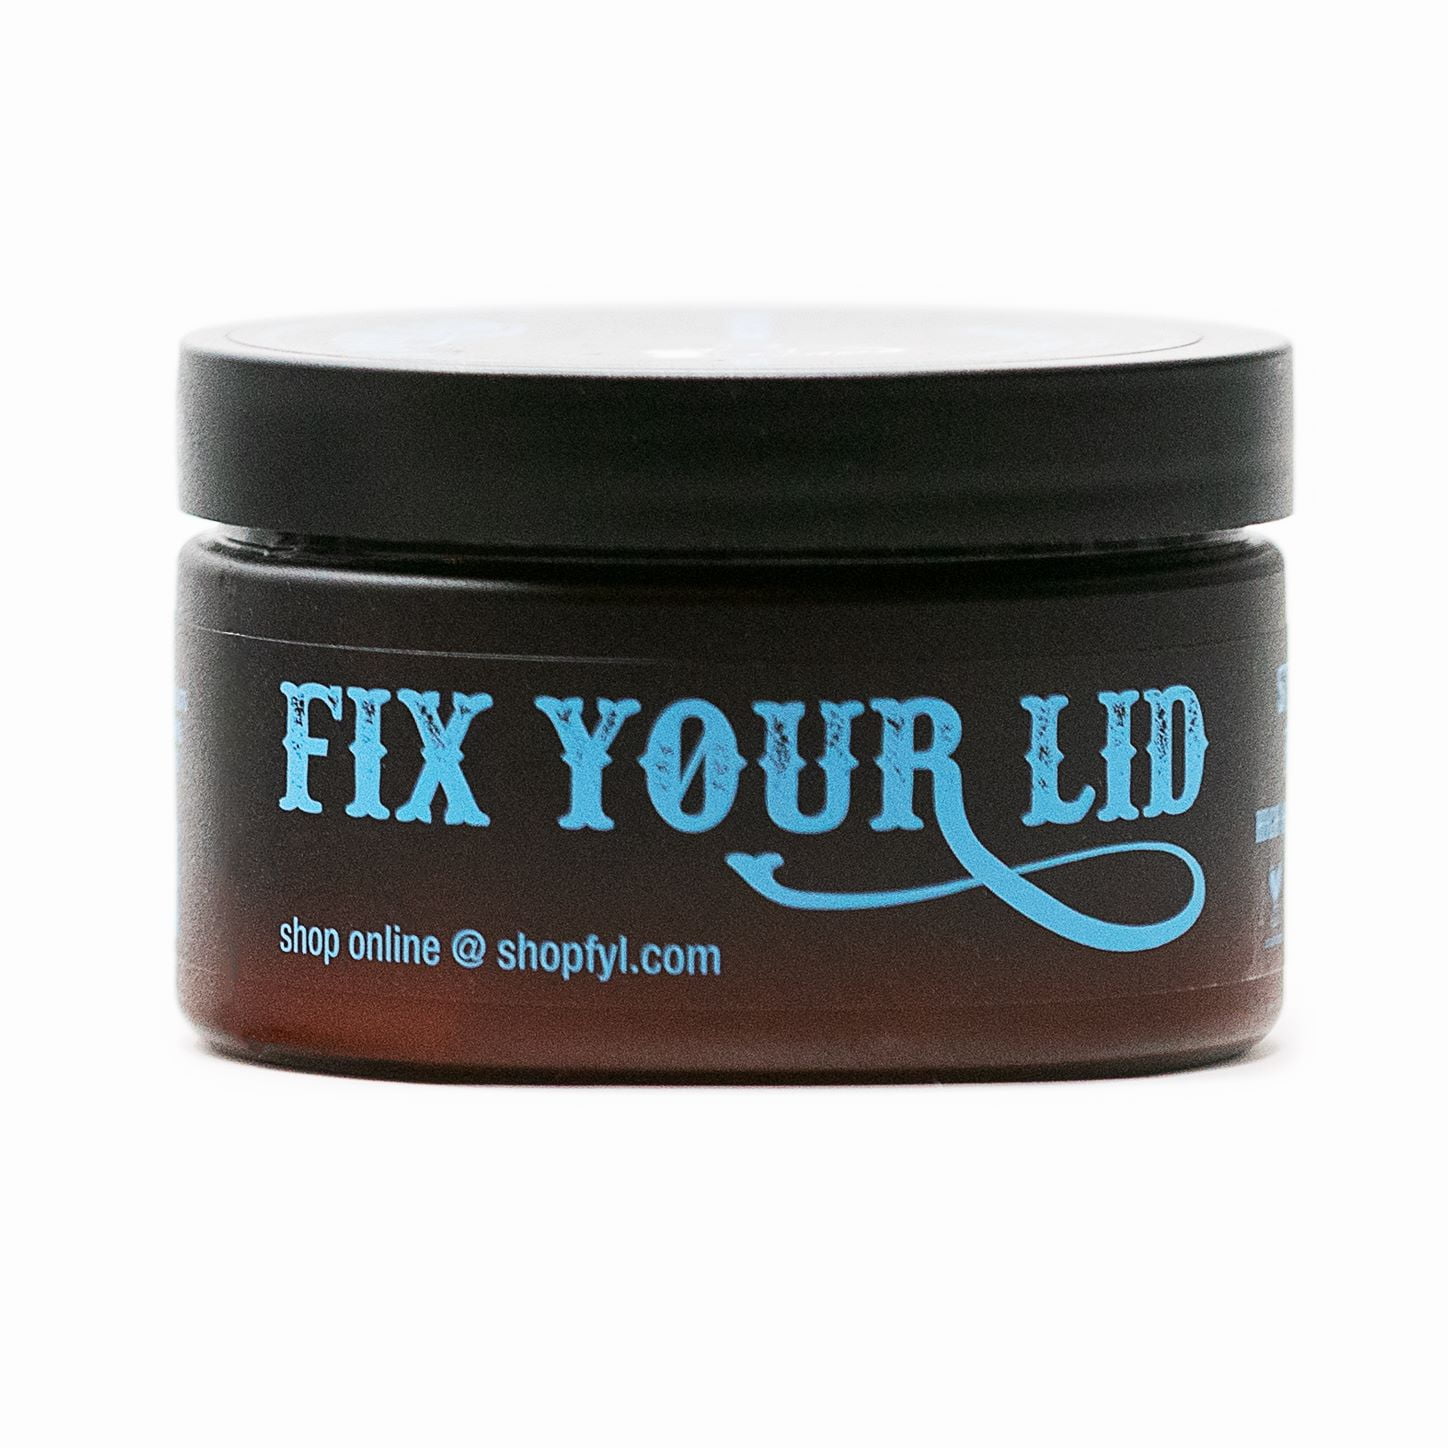 Fix Your Lid Styling Gel, Firm Hold, 8.5 fl oz/251 mL Ingredients